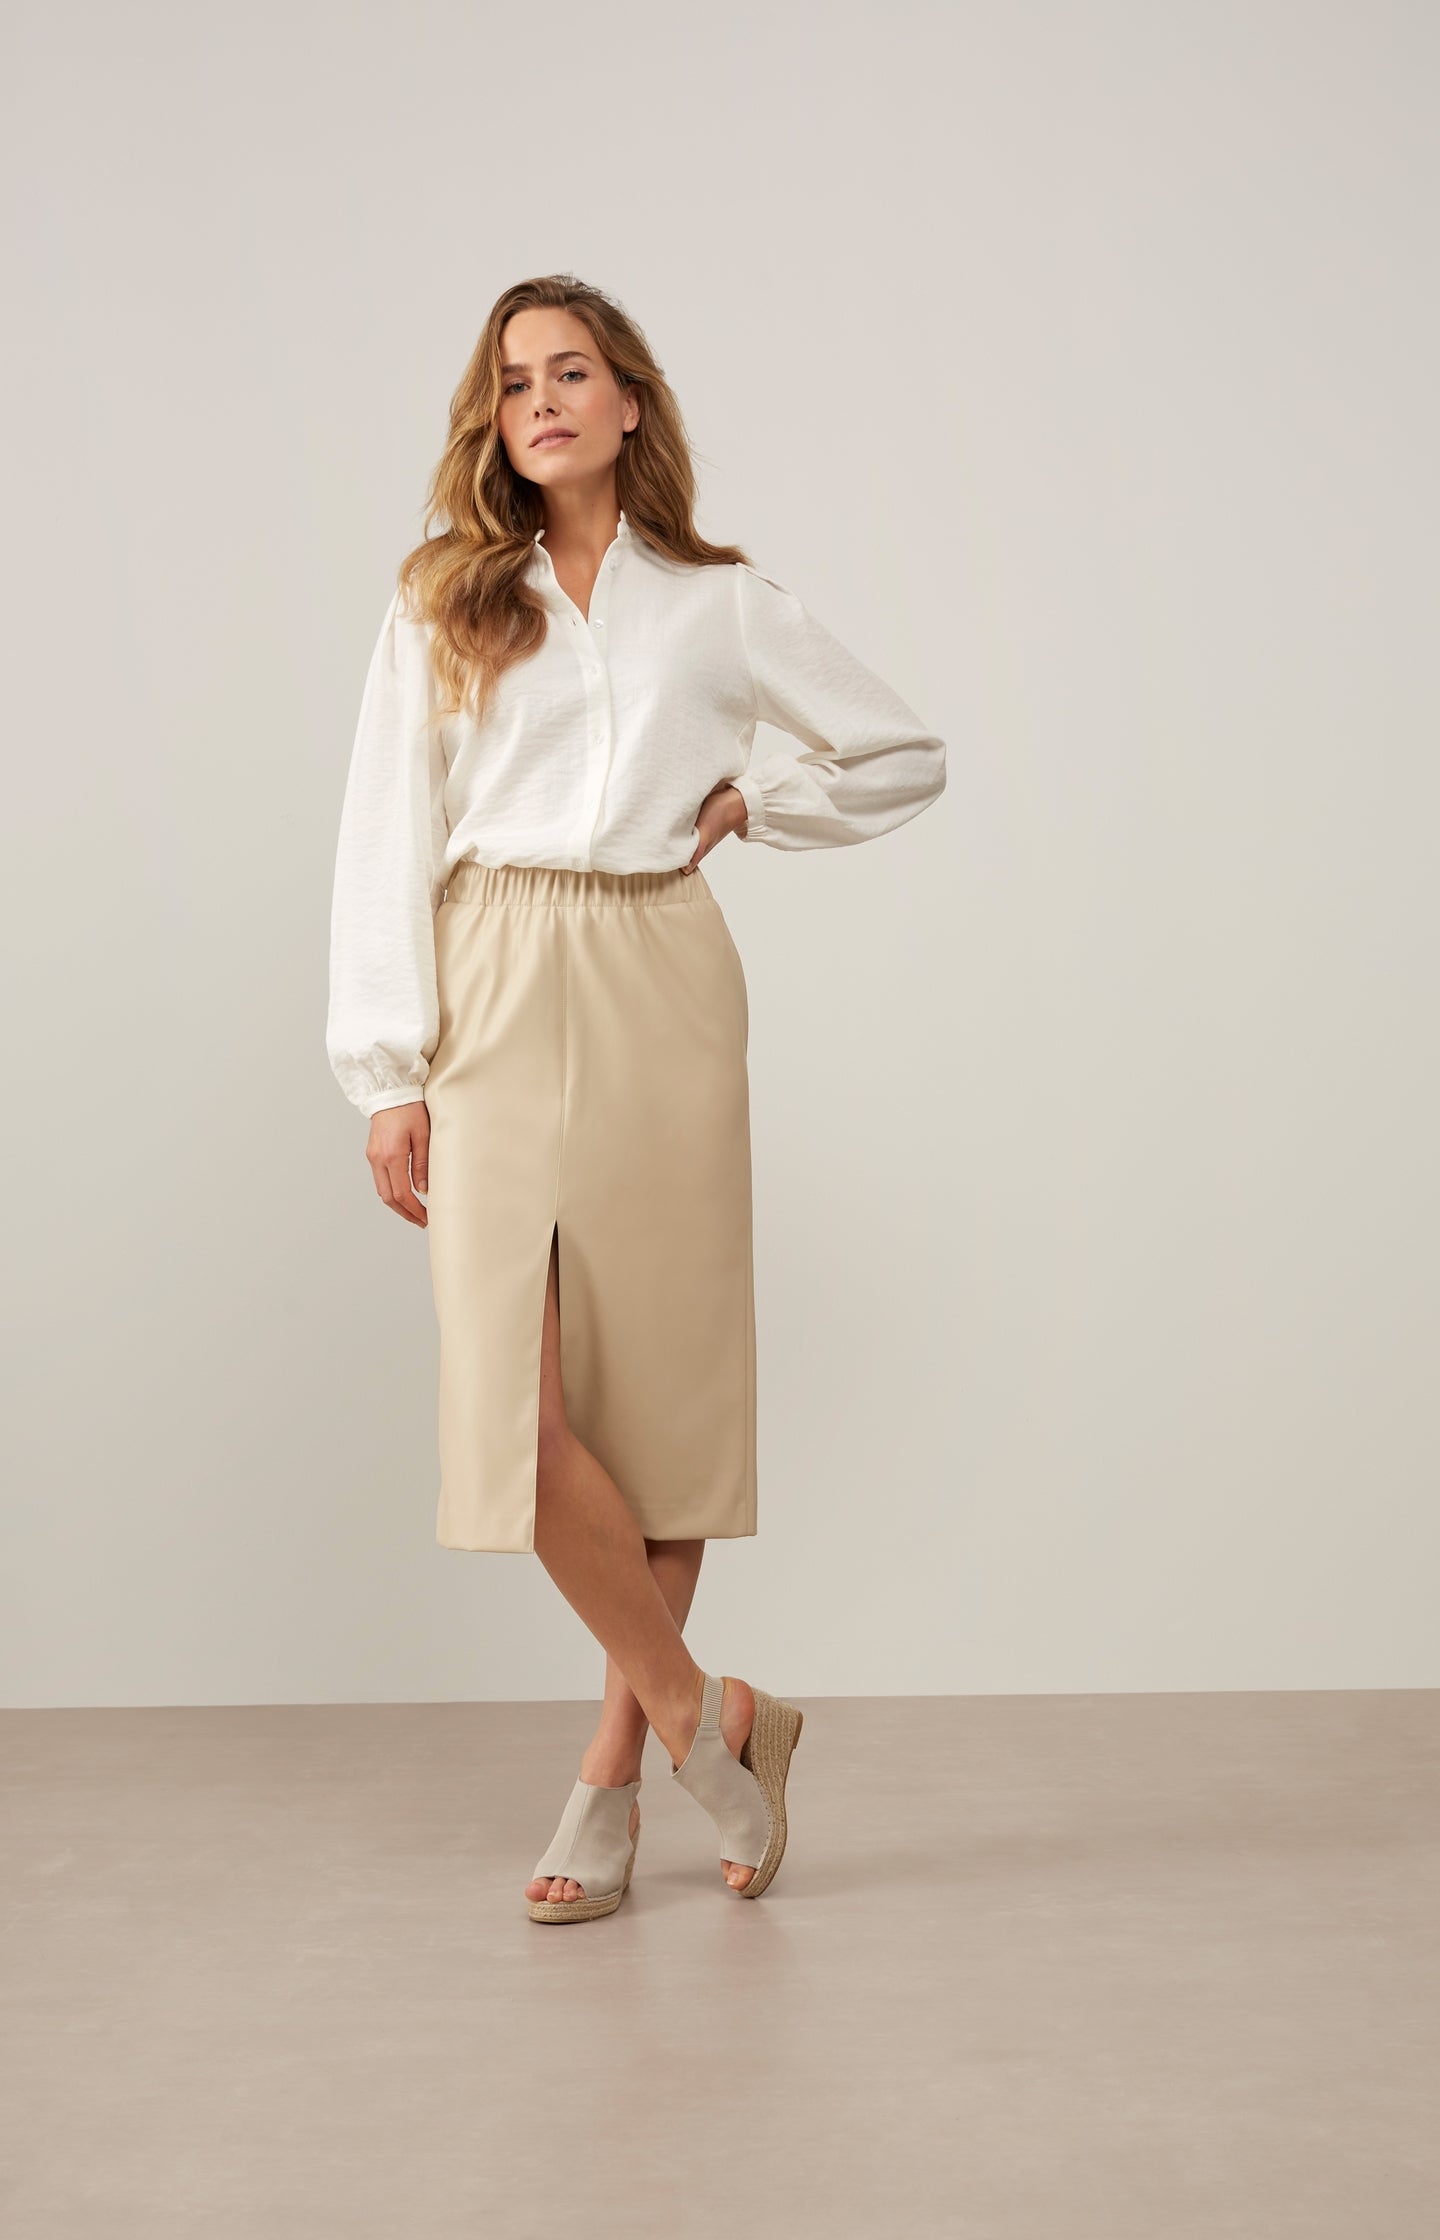 Blouse with ruffled neck, long balloon sleeves and buttons